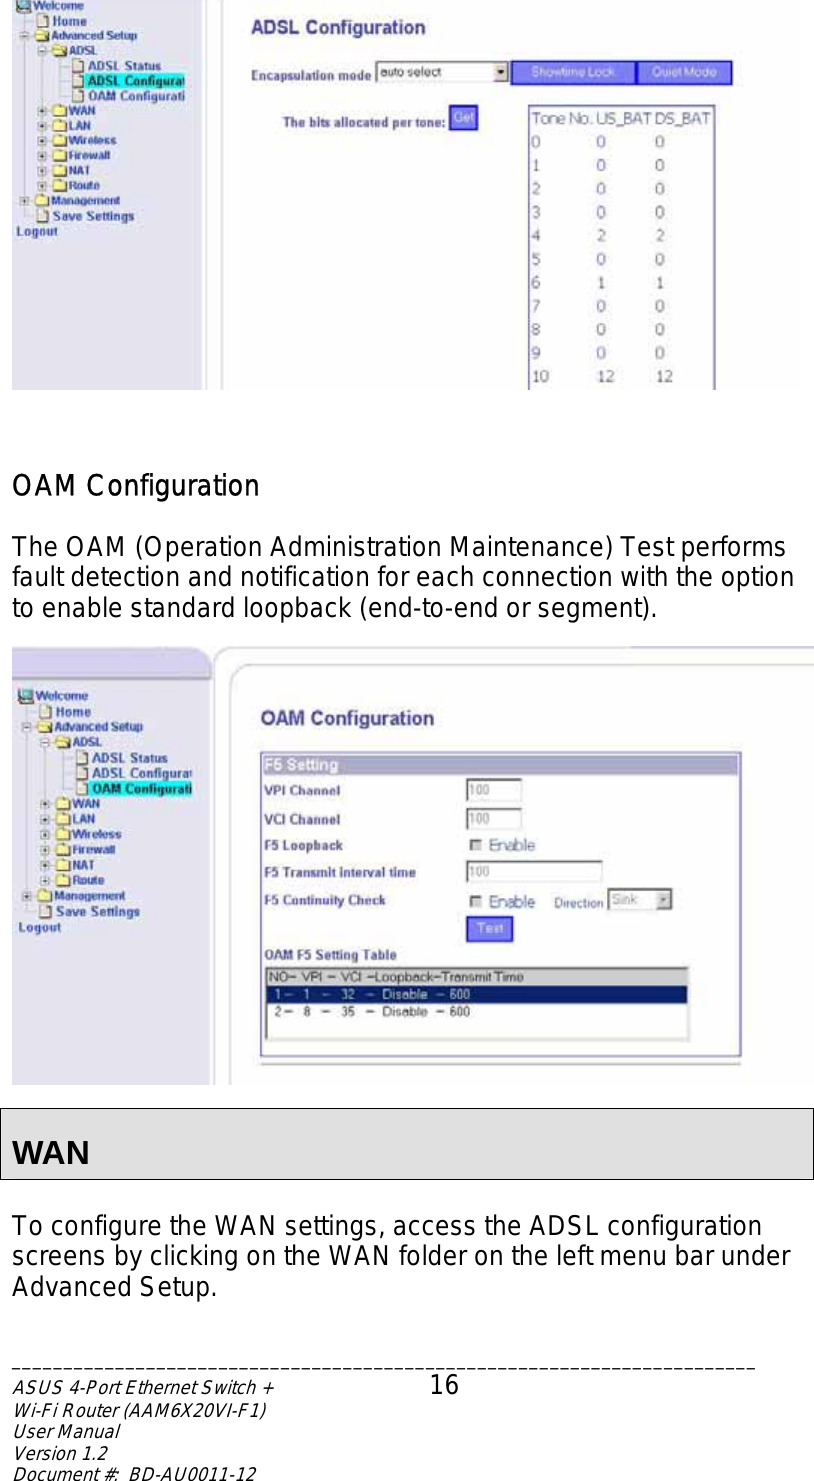    OAM Configuration  The OAM (Operation Administration Maintenance) Test performs fault detection and notification for each connection with the option to enable standard loopback (end-to-end or segment).    WAN  To configure the WAN settings, access the ADSL configuration screens by clicking on the WAN folder on the left menu bar under Advanced Setup. ________________________________________________________________________ASUS 4-Port Ethernet Switch +  16 Wi-Fi Router (AAM6X20VI-F1) User Manual                                                                         Version 1.2 Document #:  BD-AU0011-12  